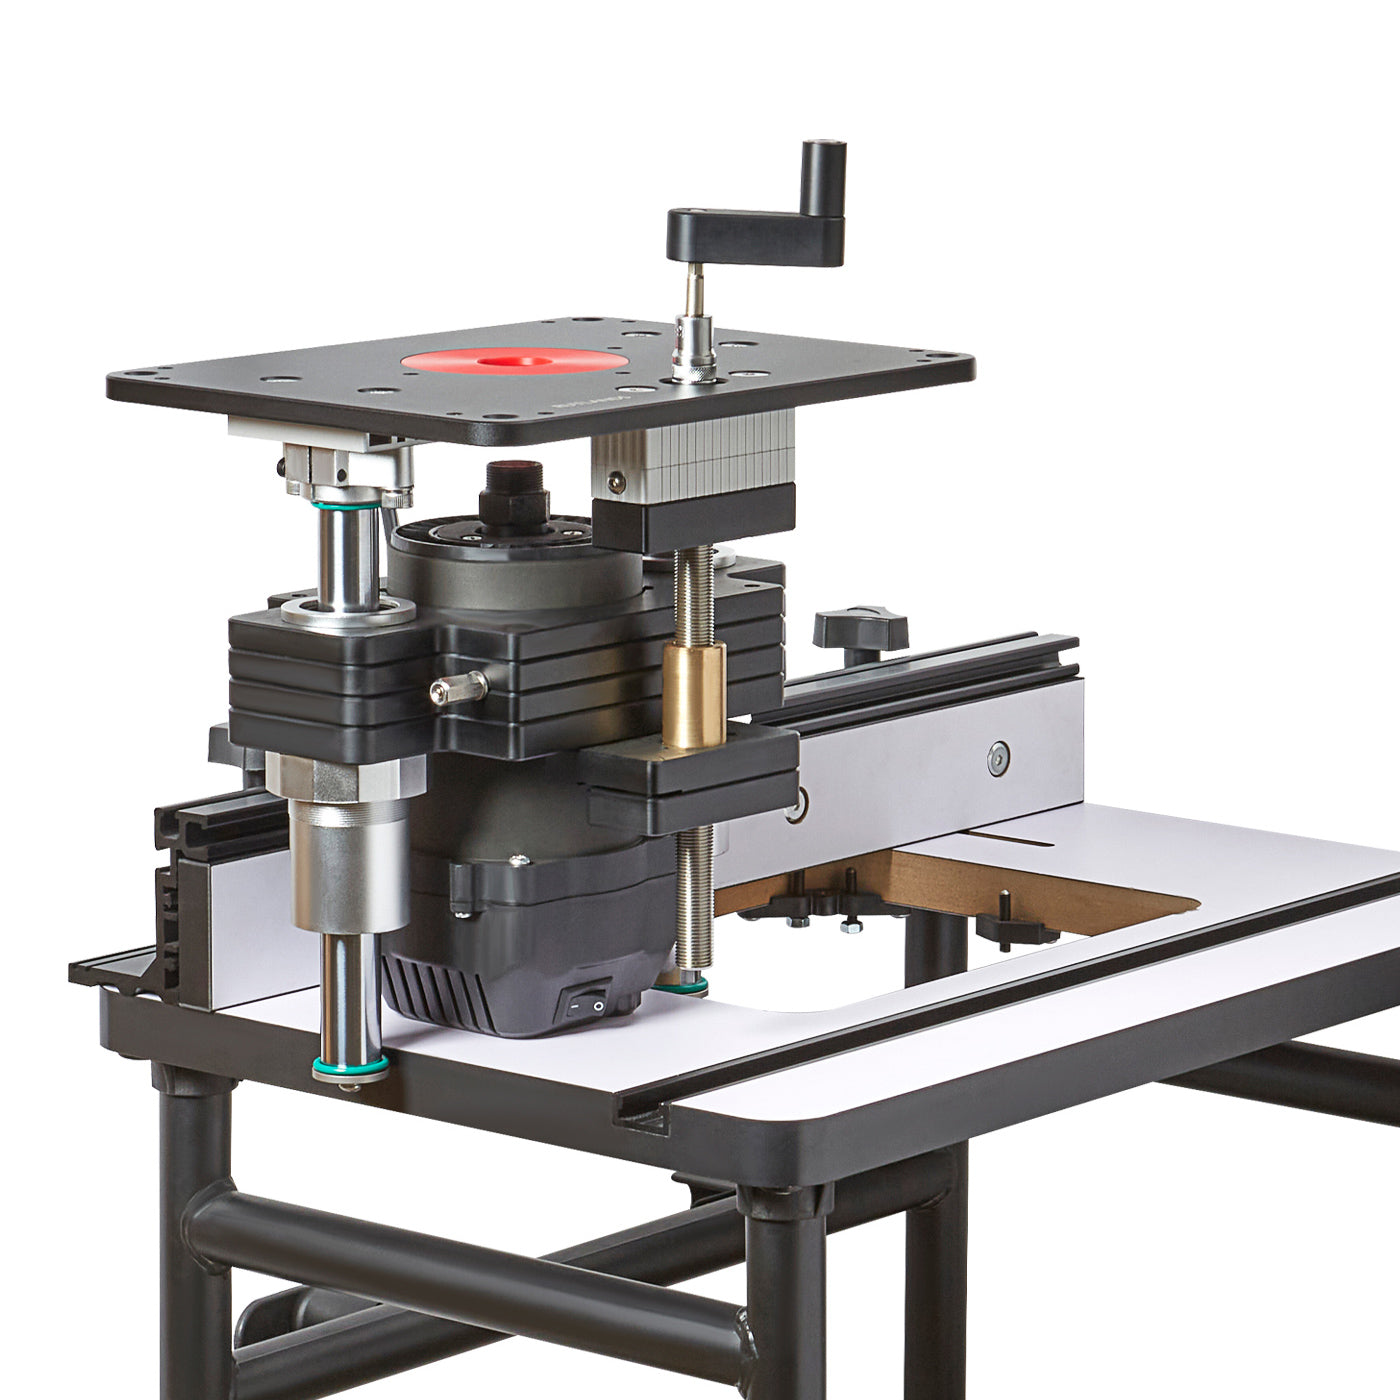 Bench Router Table - R15 Lift and Motor